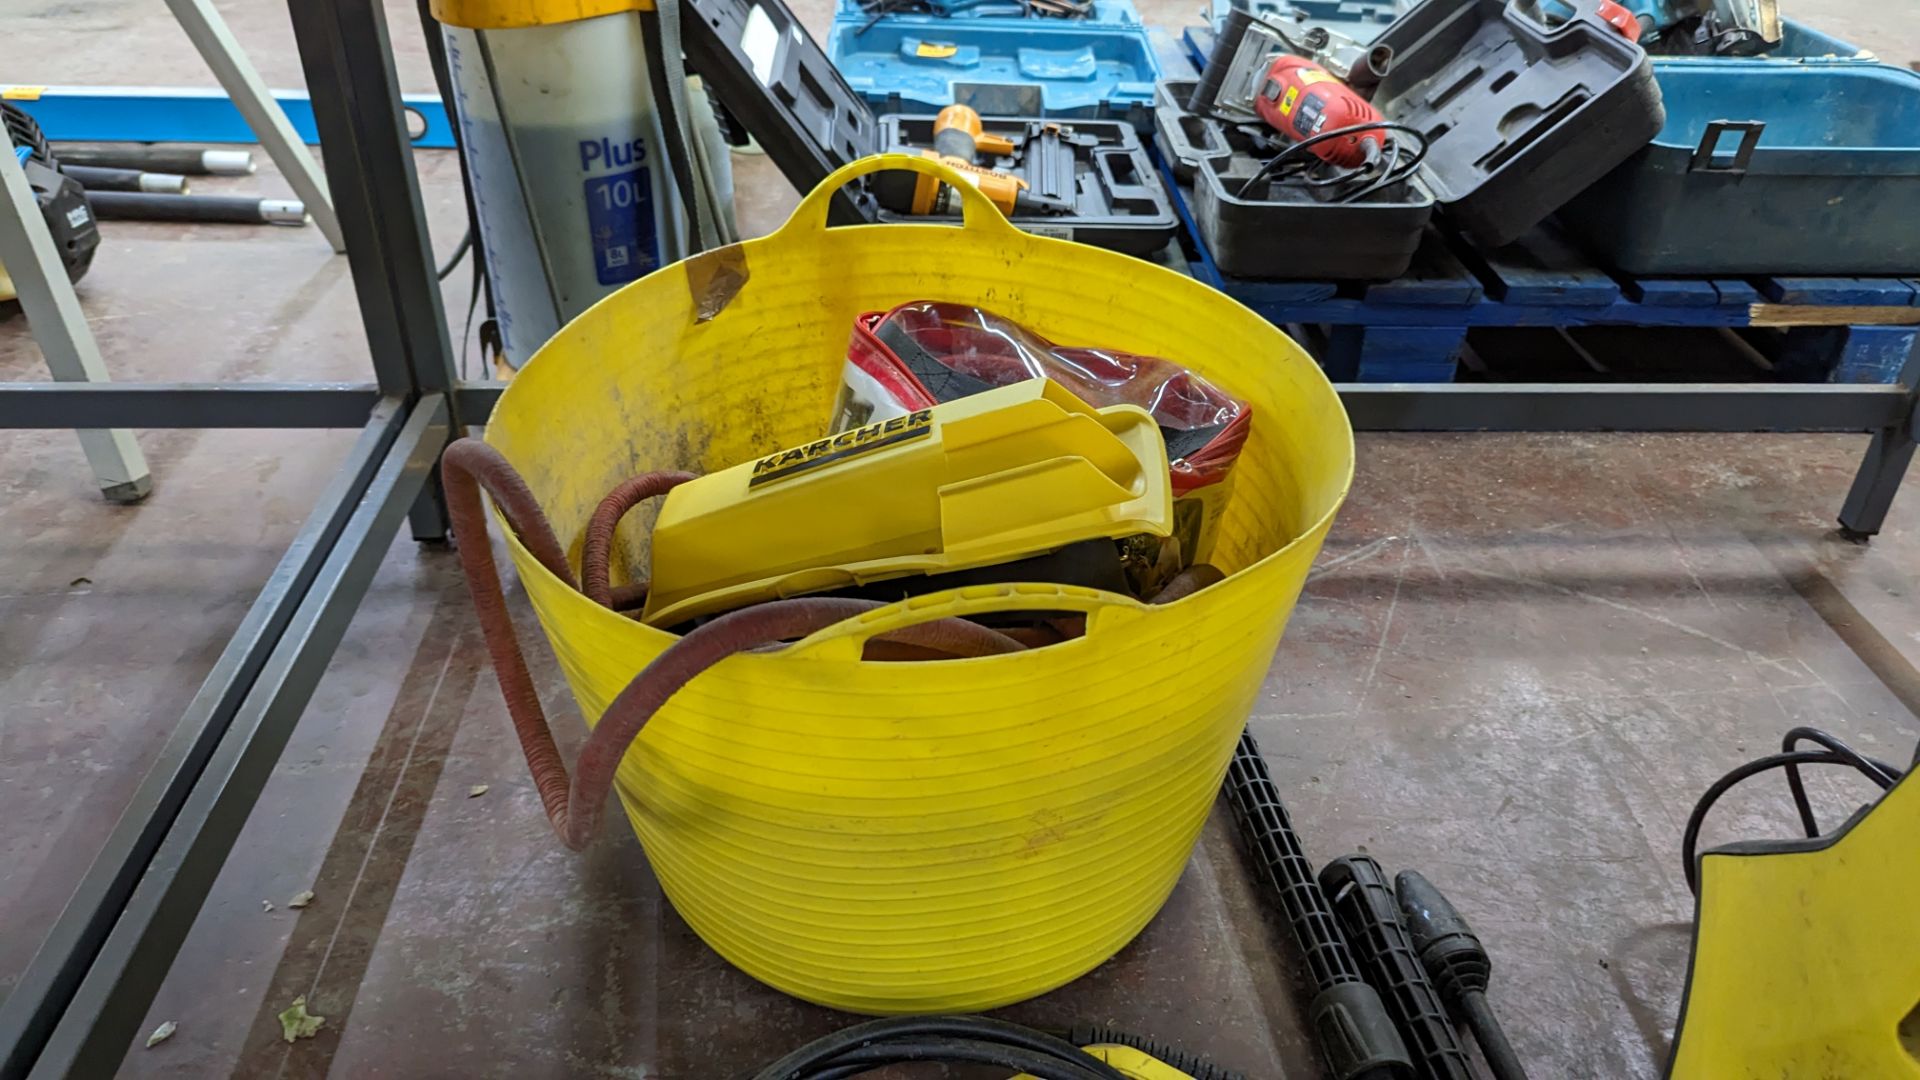 Karcher pressure washer including attachments plus bucket & contents - the total contents of the bay - Image 6 of 7